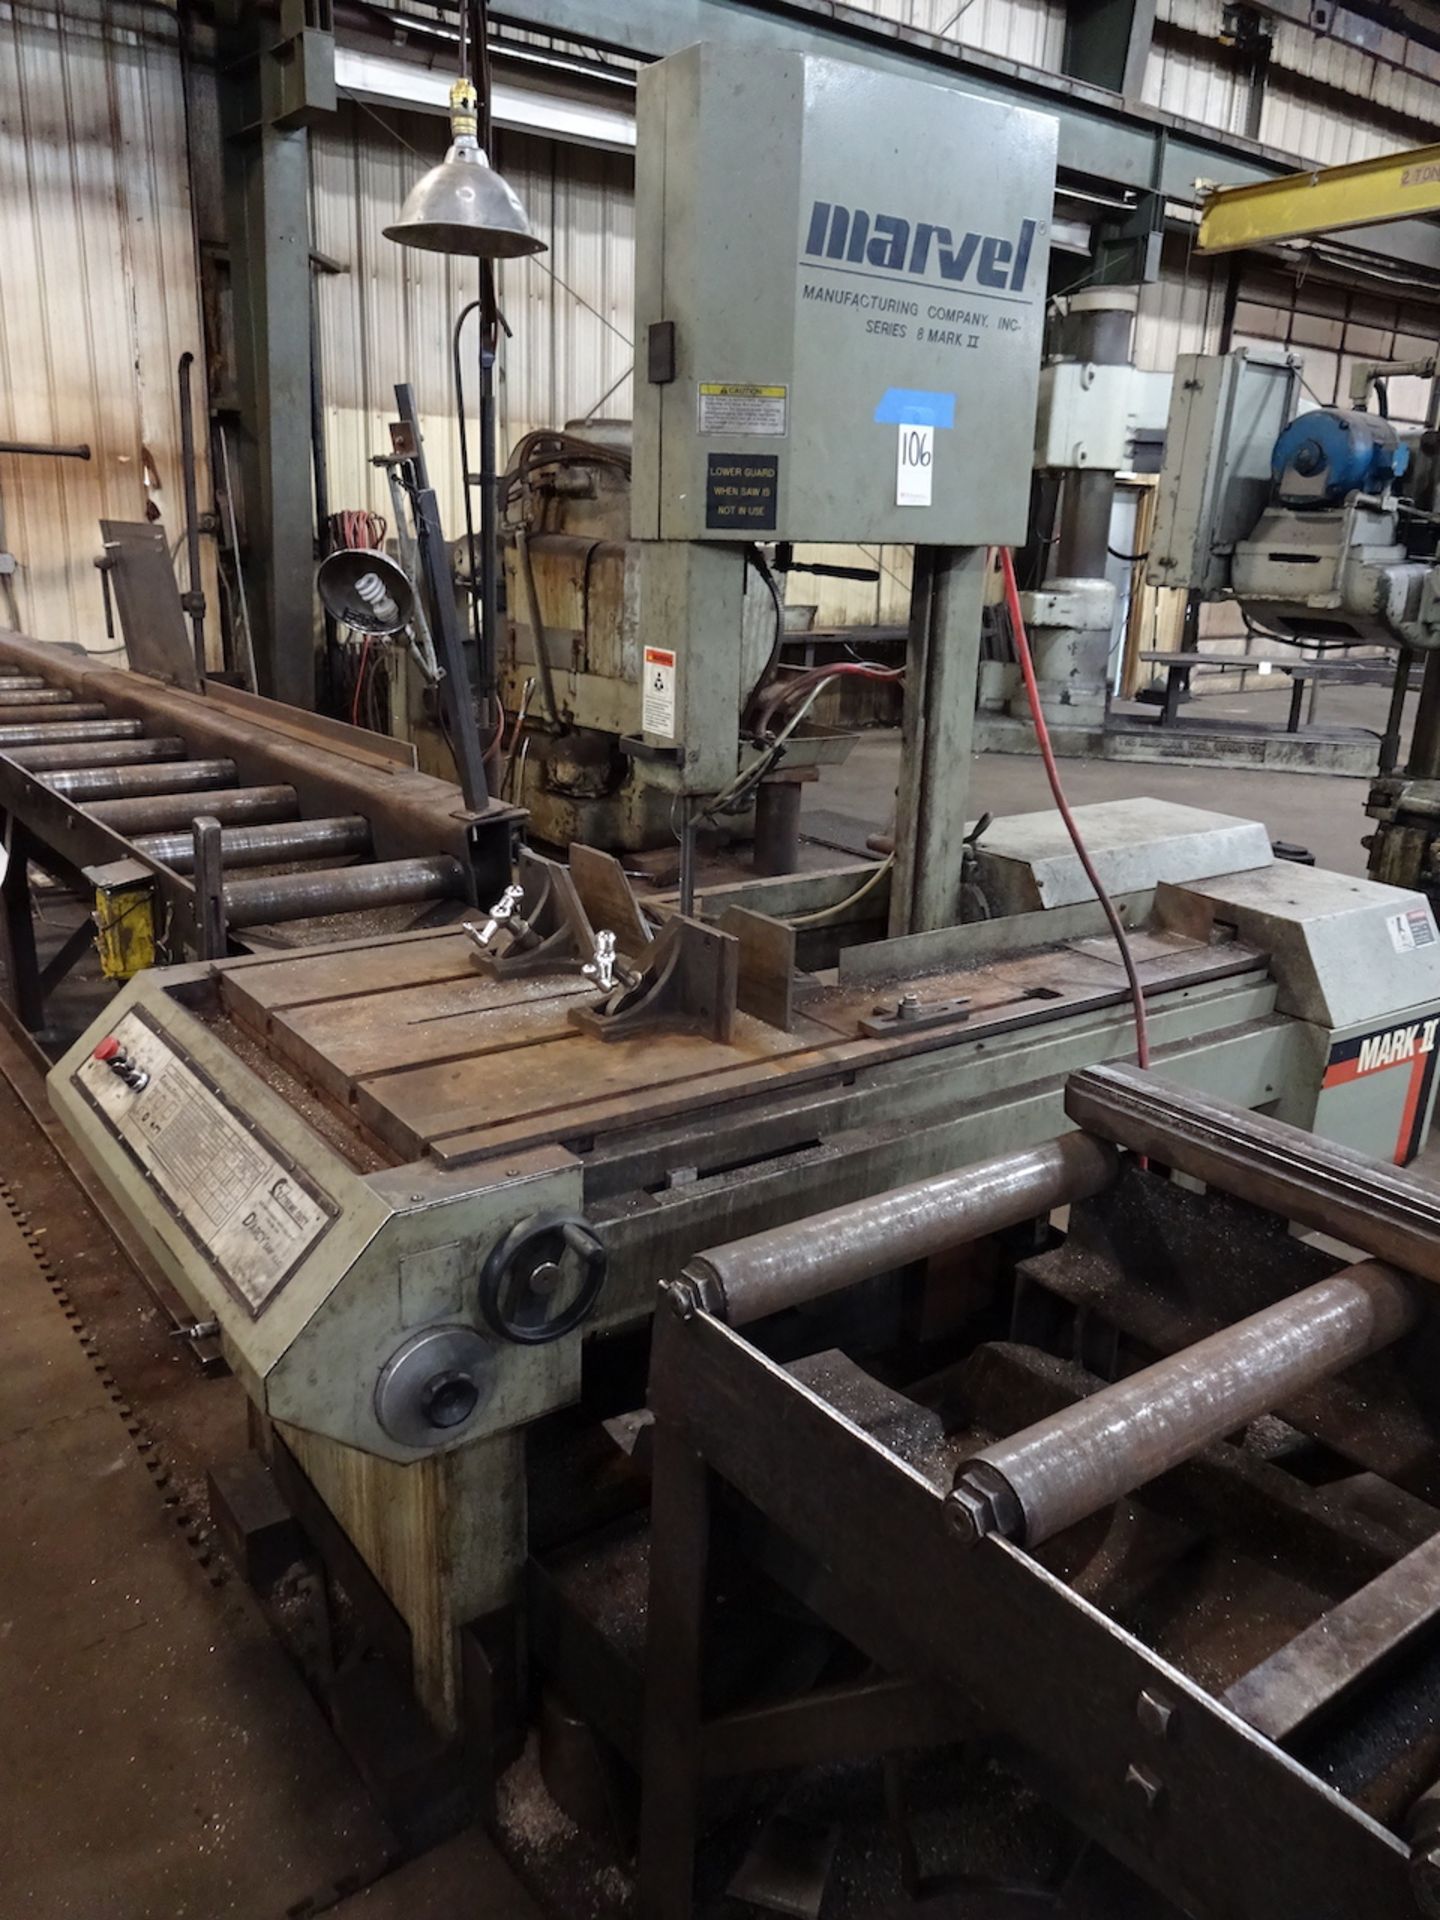 Marvel Model 8-Mark-II Vertical Band Saw, S/N 830913 (2012), with Heavy Duty Roller Infeed & Outfeed - Image 2 of 9